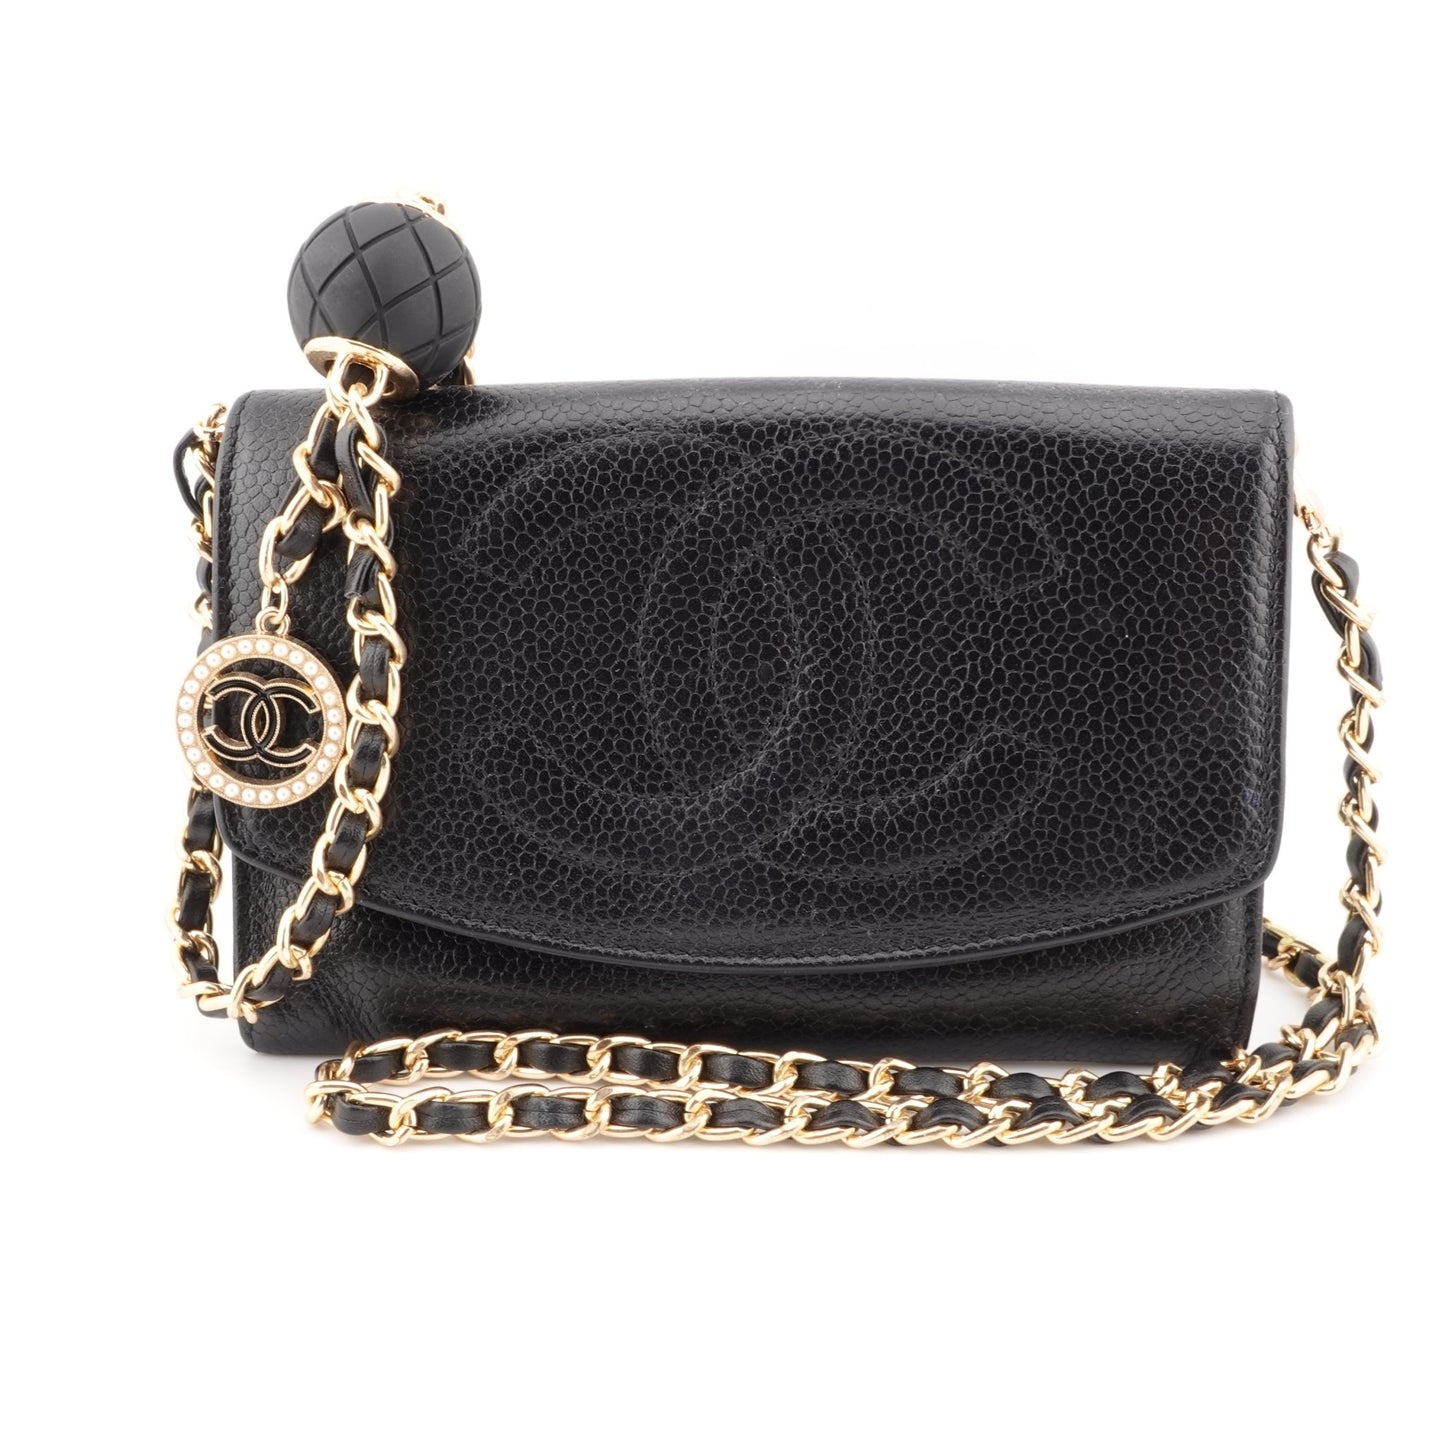 CHANEL Caviar Timeless Compact Wallet on Adjustable Chain - Bag Envy